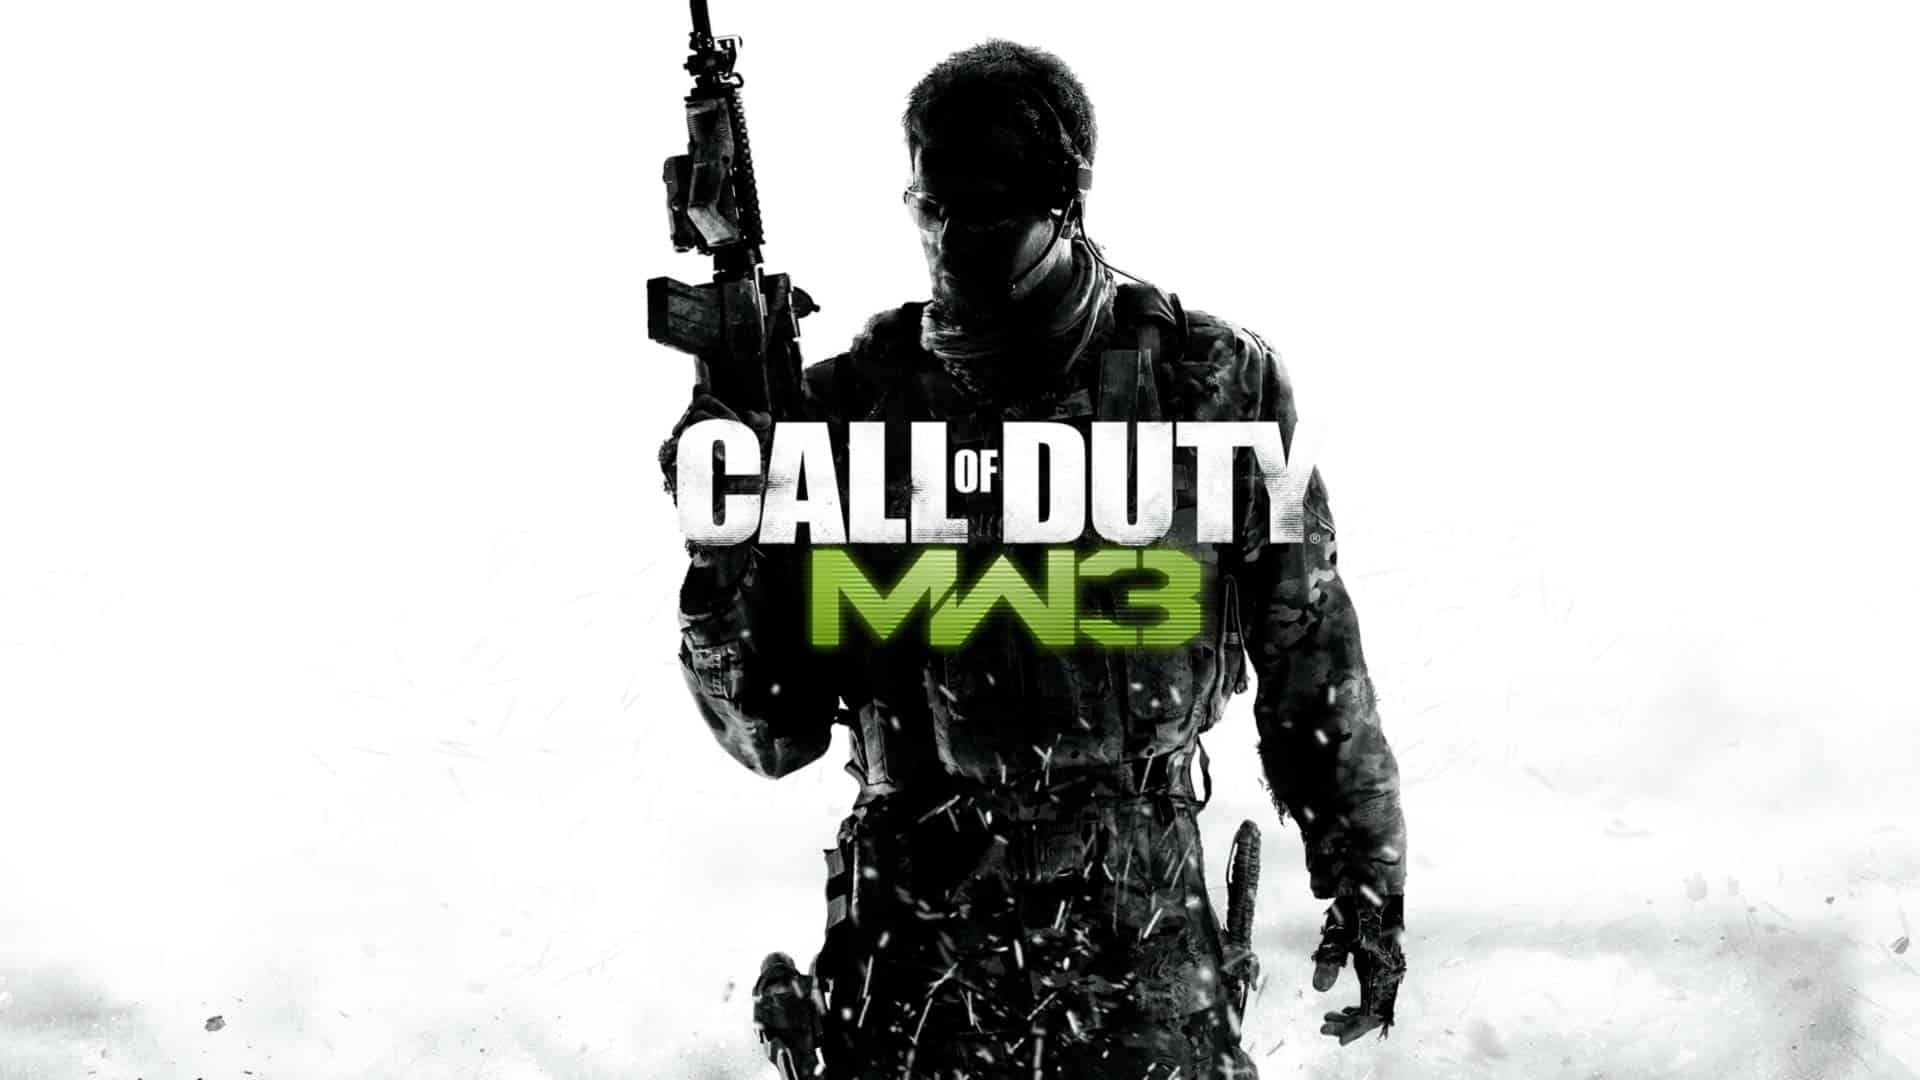 CALL OF DUTY MODERN WARFARE 3 Android/iOS Mobile Version Full Free Download